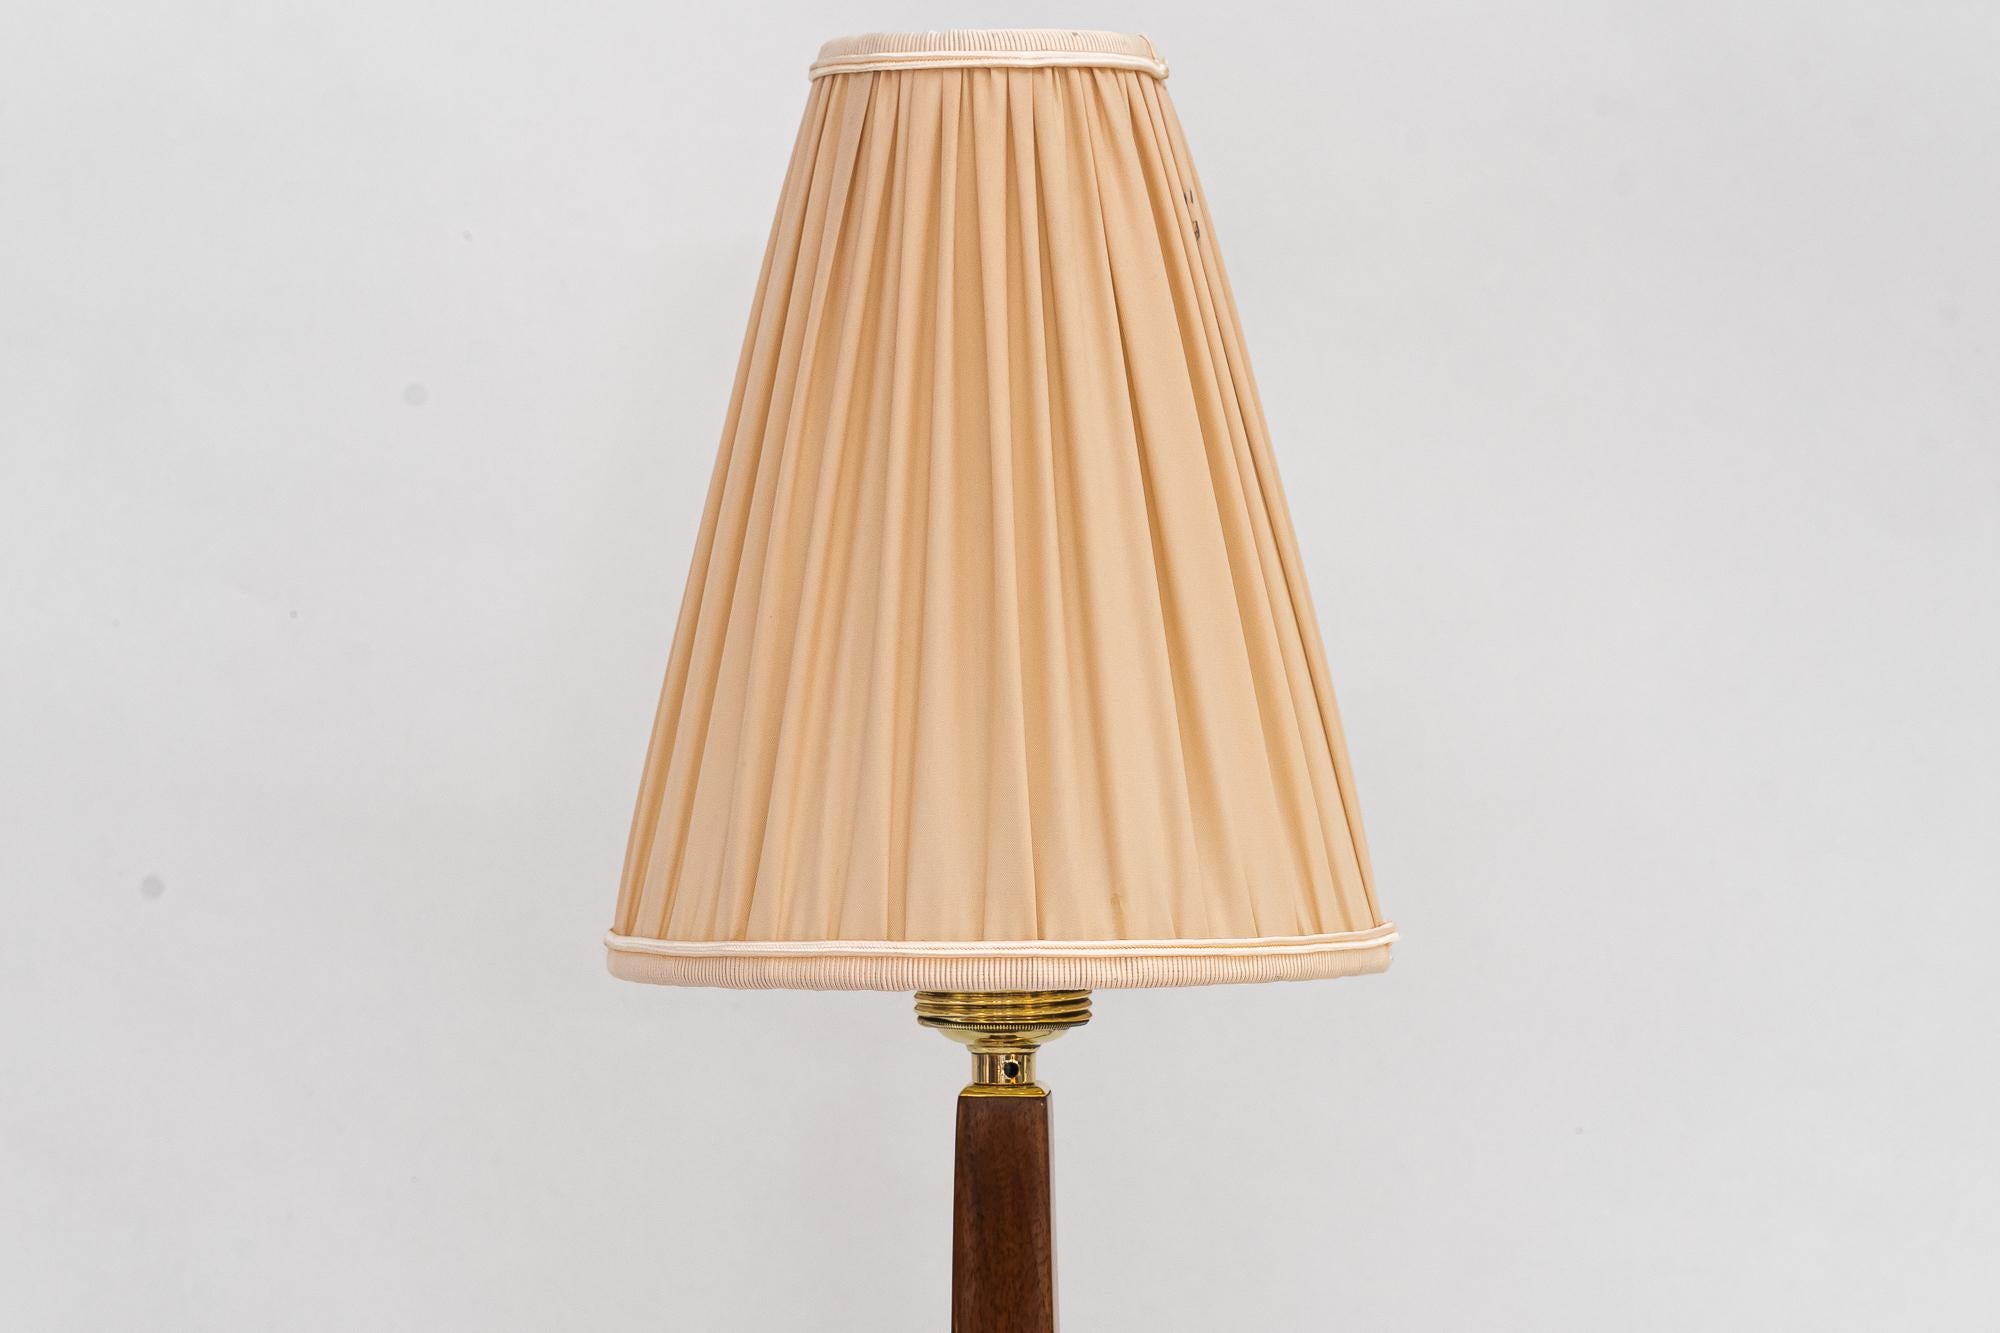 Austrian Art Deco Wood Table Lamp with Fabric Shade Vienna Around 1920s For Sale